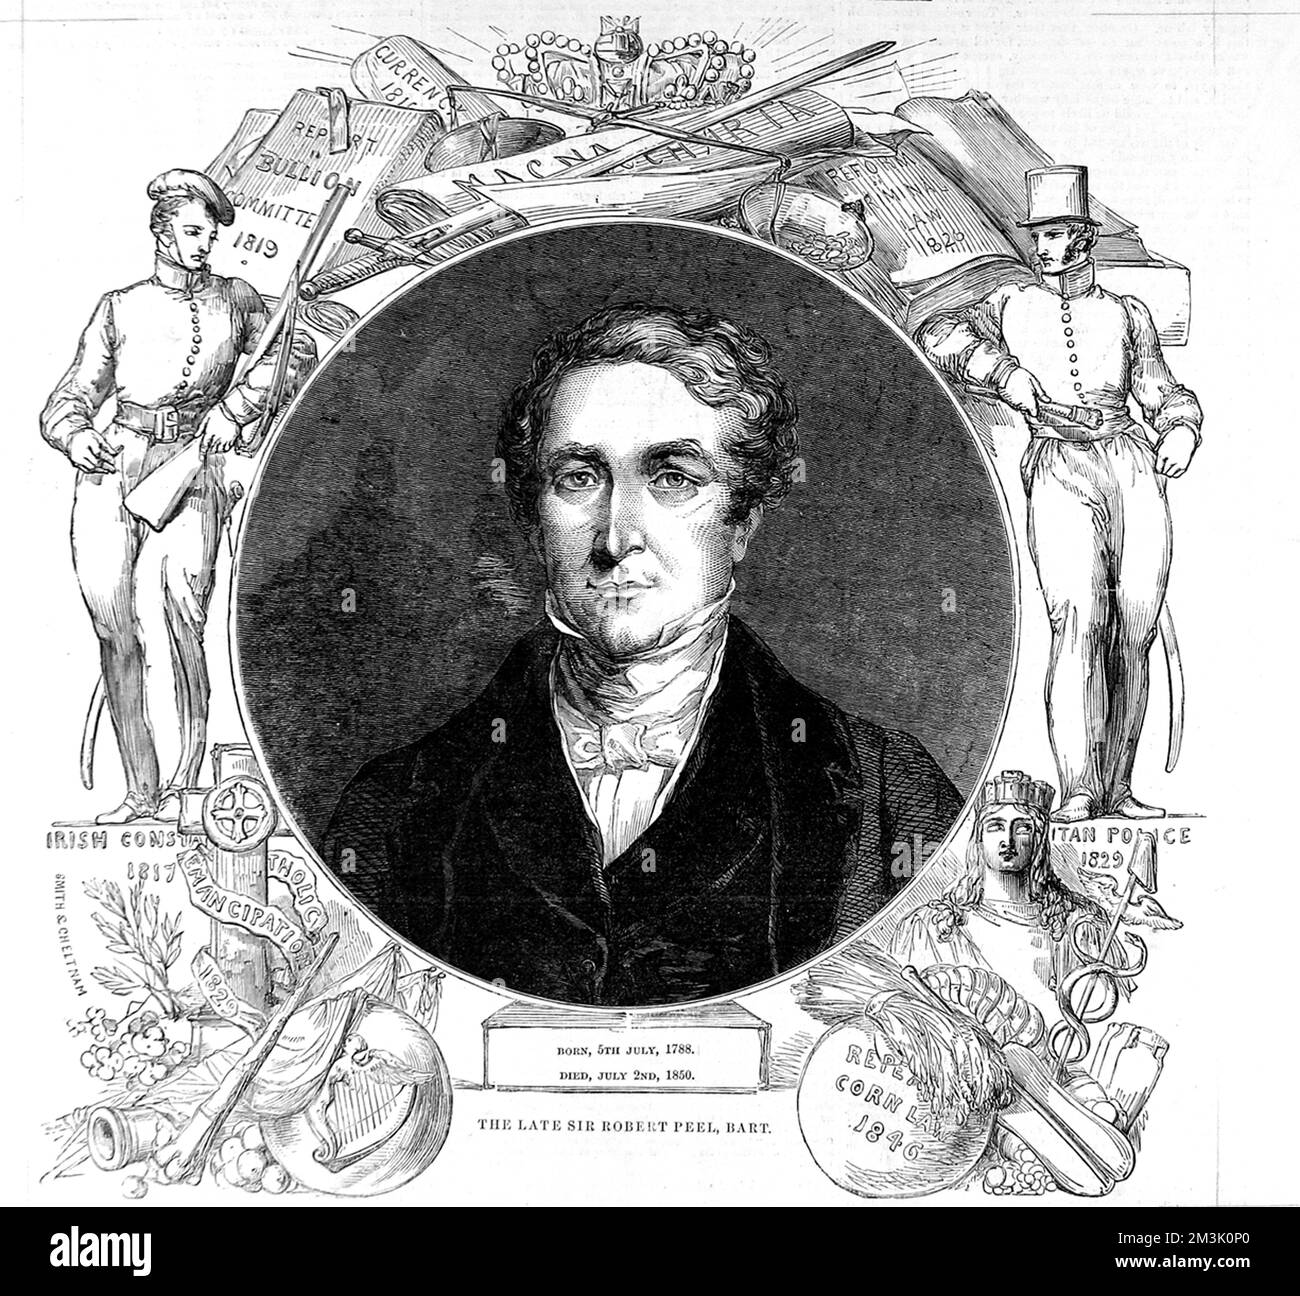 Sir Robert Peel (1788 - 1850), English statesman and Prime Minister, surrounded by illustrations of his political achievements.   Peel was a Conservative MP who held strong views on Irish Catholicism and Free Trade vs Protectionism, but is probably best remembered for organising the London Police Force in 1829. For a long time, British policemen were nicknamed 'Peelers' or 'Bobbies' in reference to Robert Peel.   On 29th June 1850, Peel was thrown from his horse and sustained fatal injuries. Stock Photo